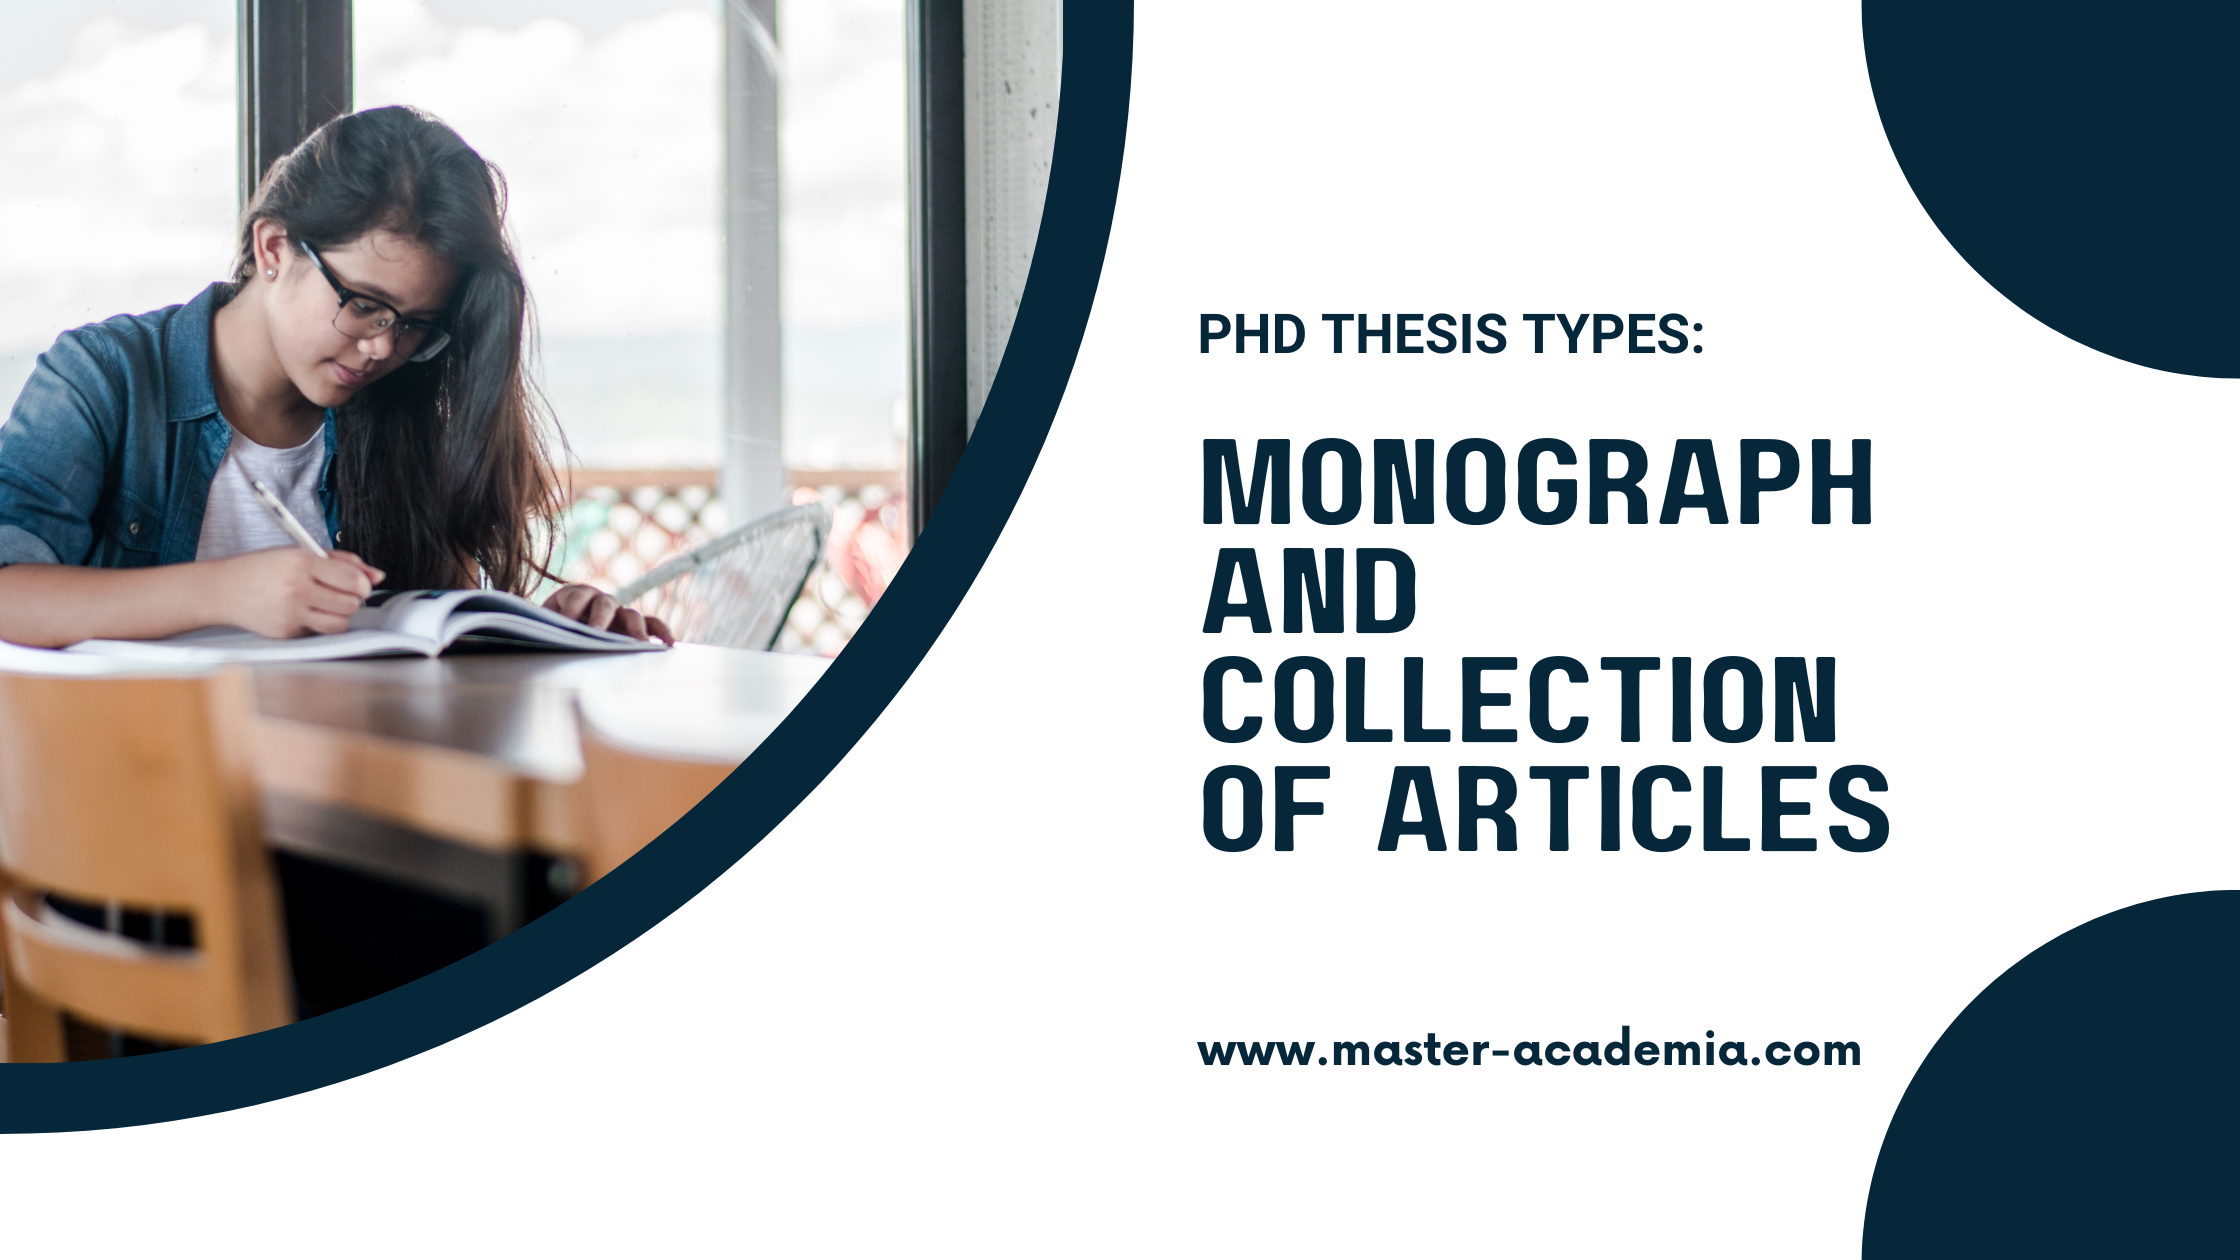 turning thesis into monograph